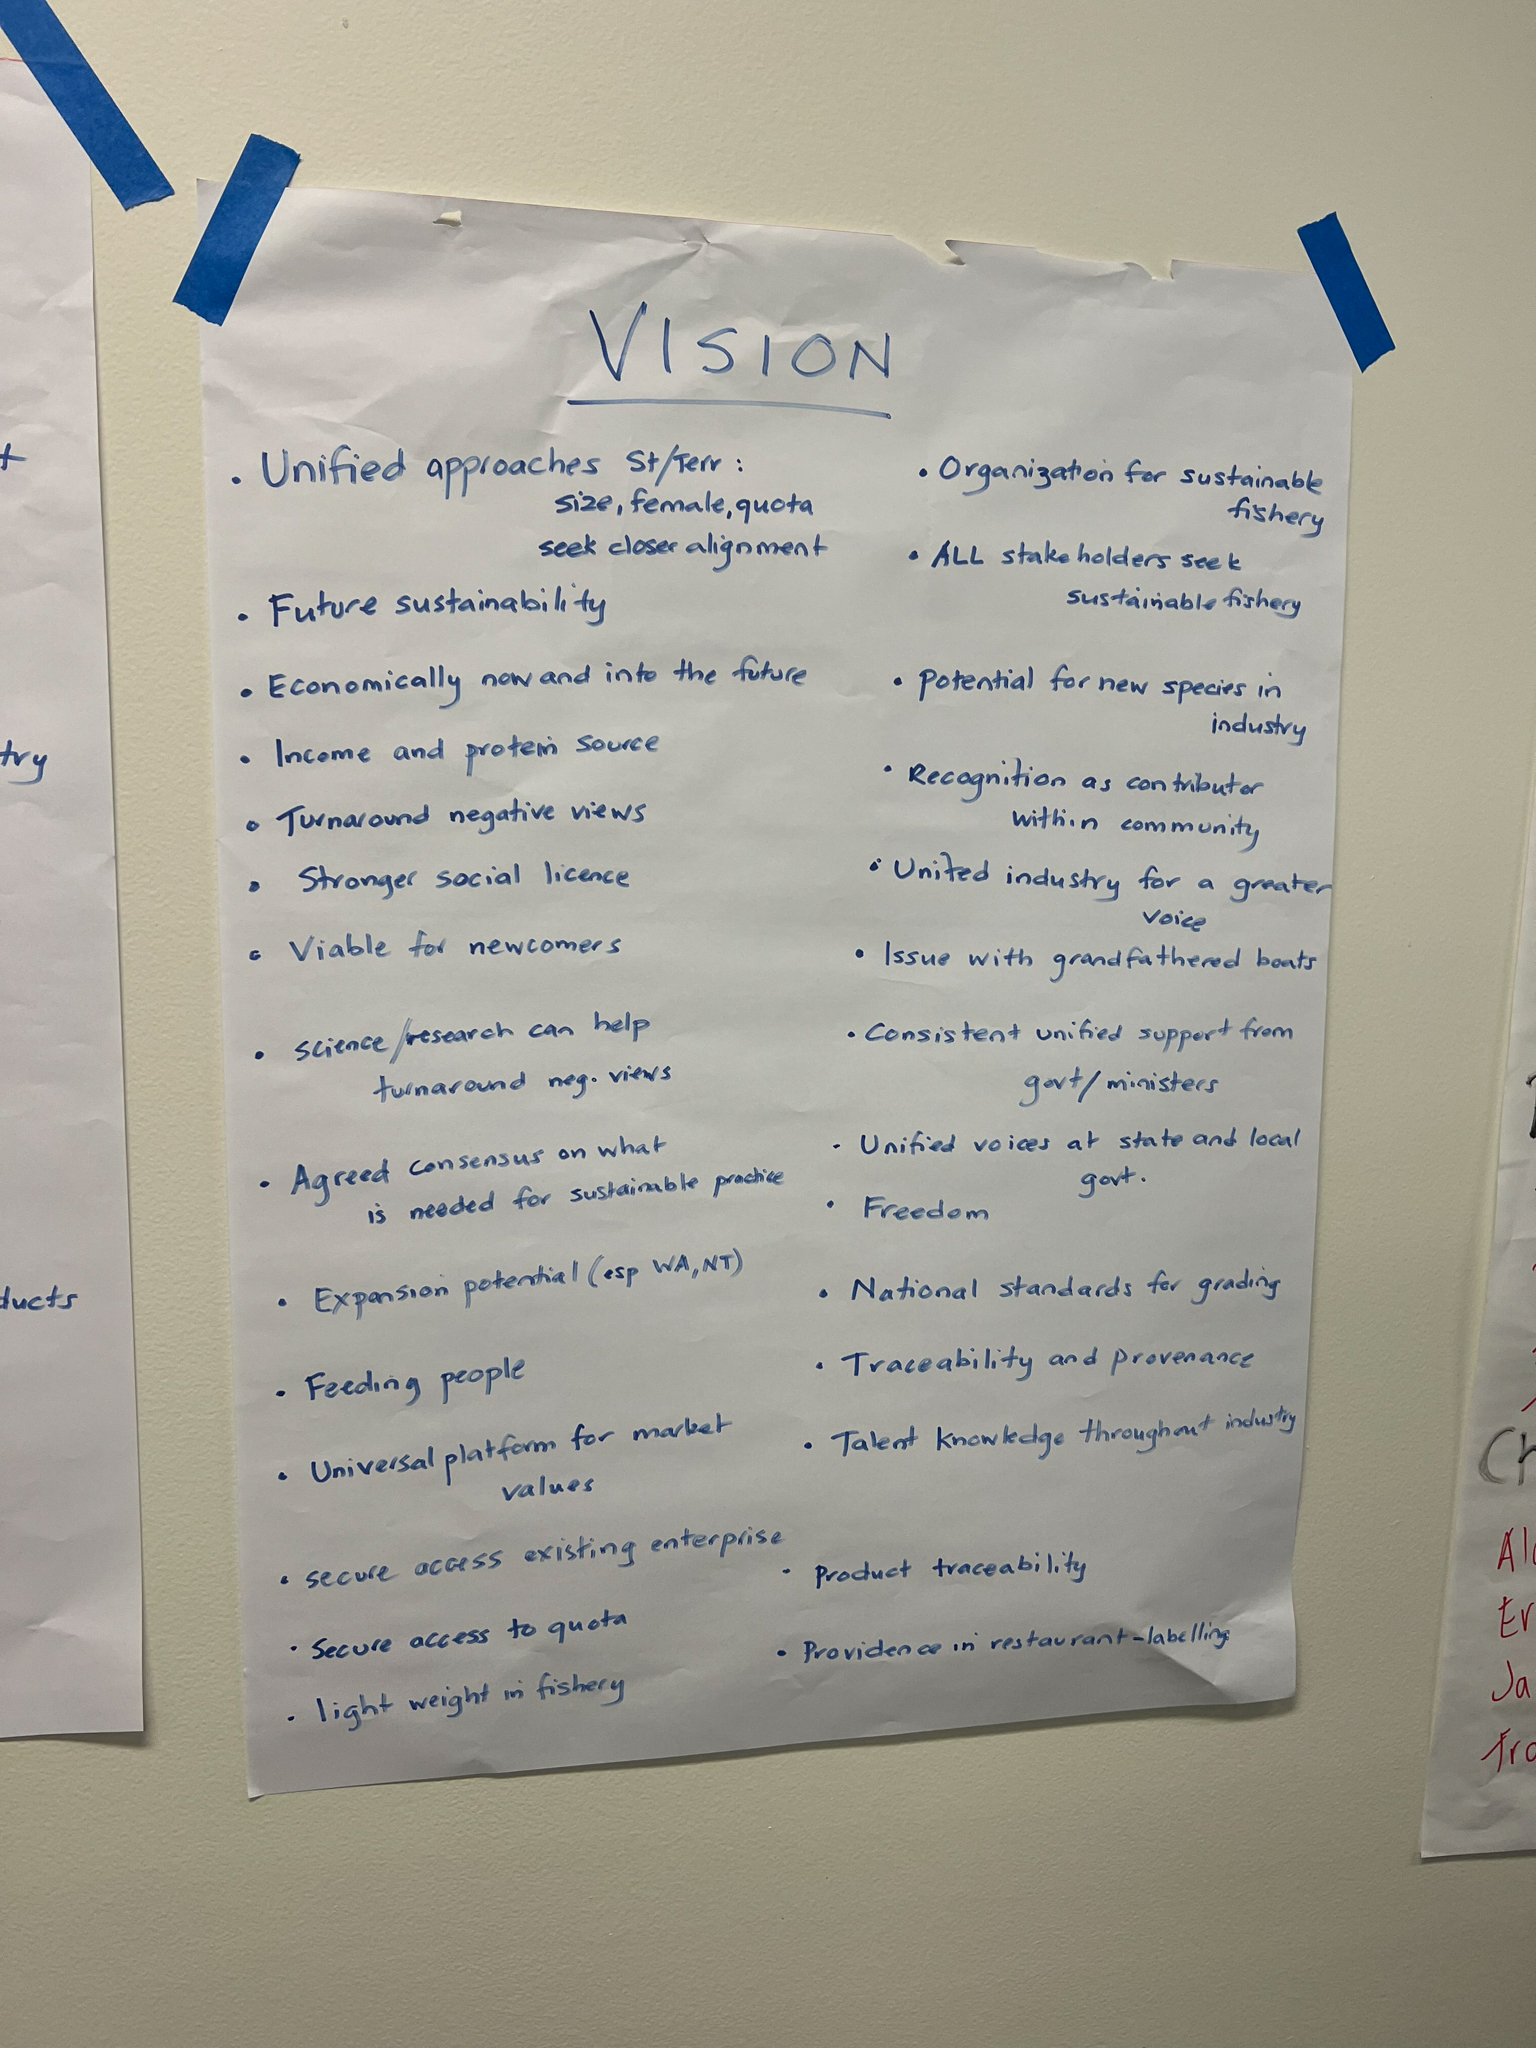 Workshop participants brainstormed the values to be included in the mud crab industry development strategy